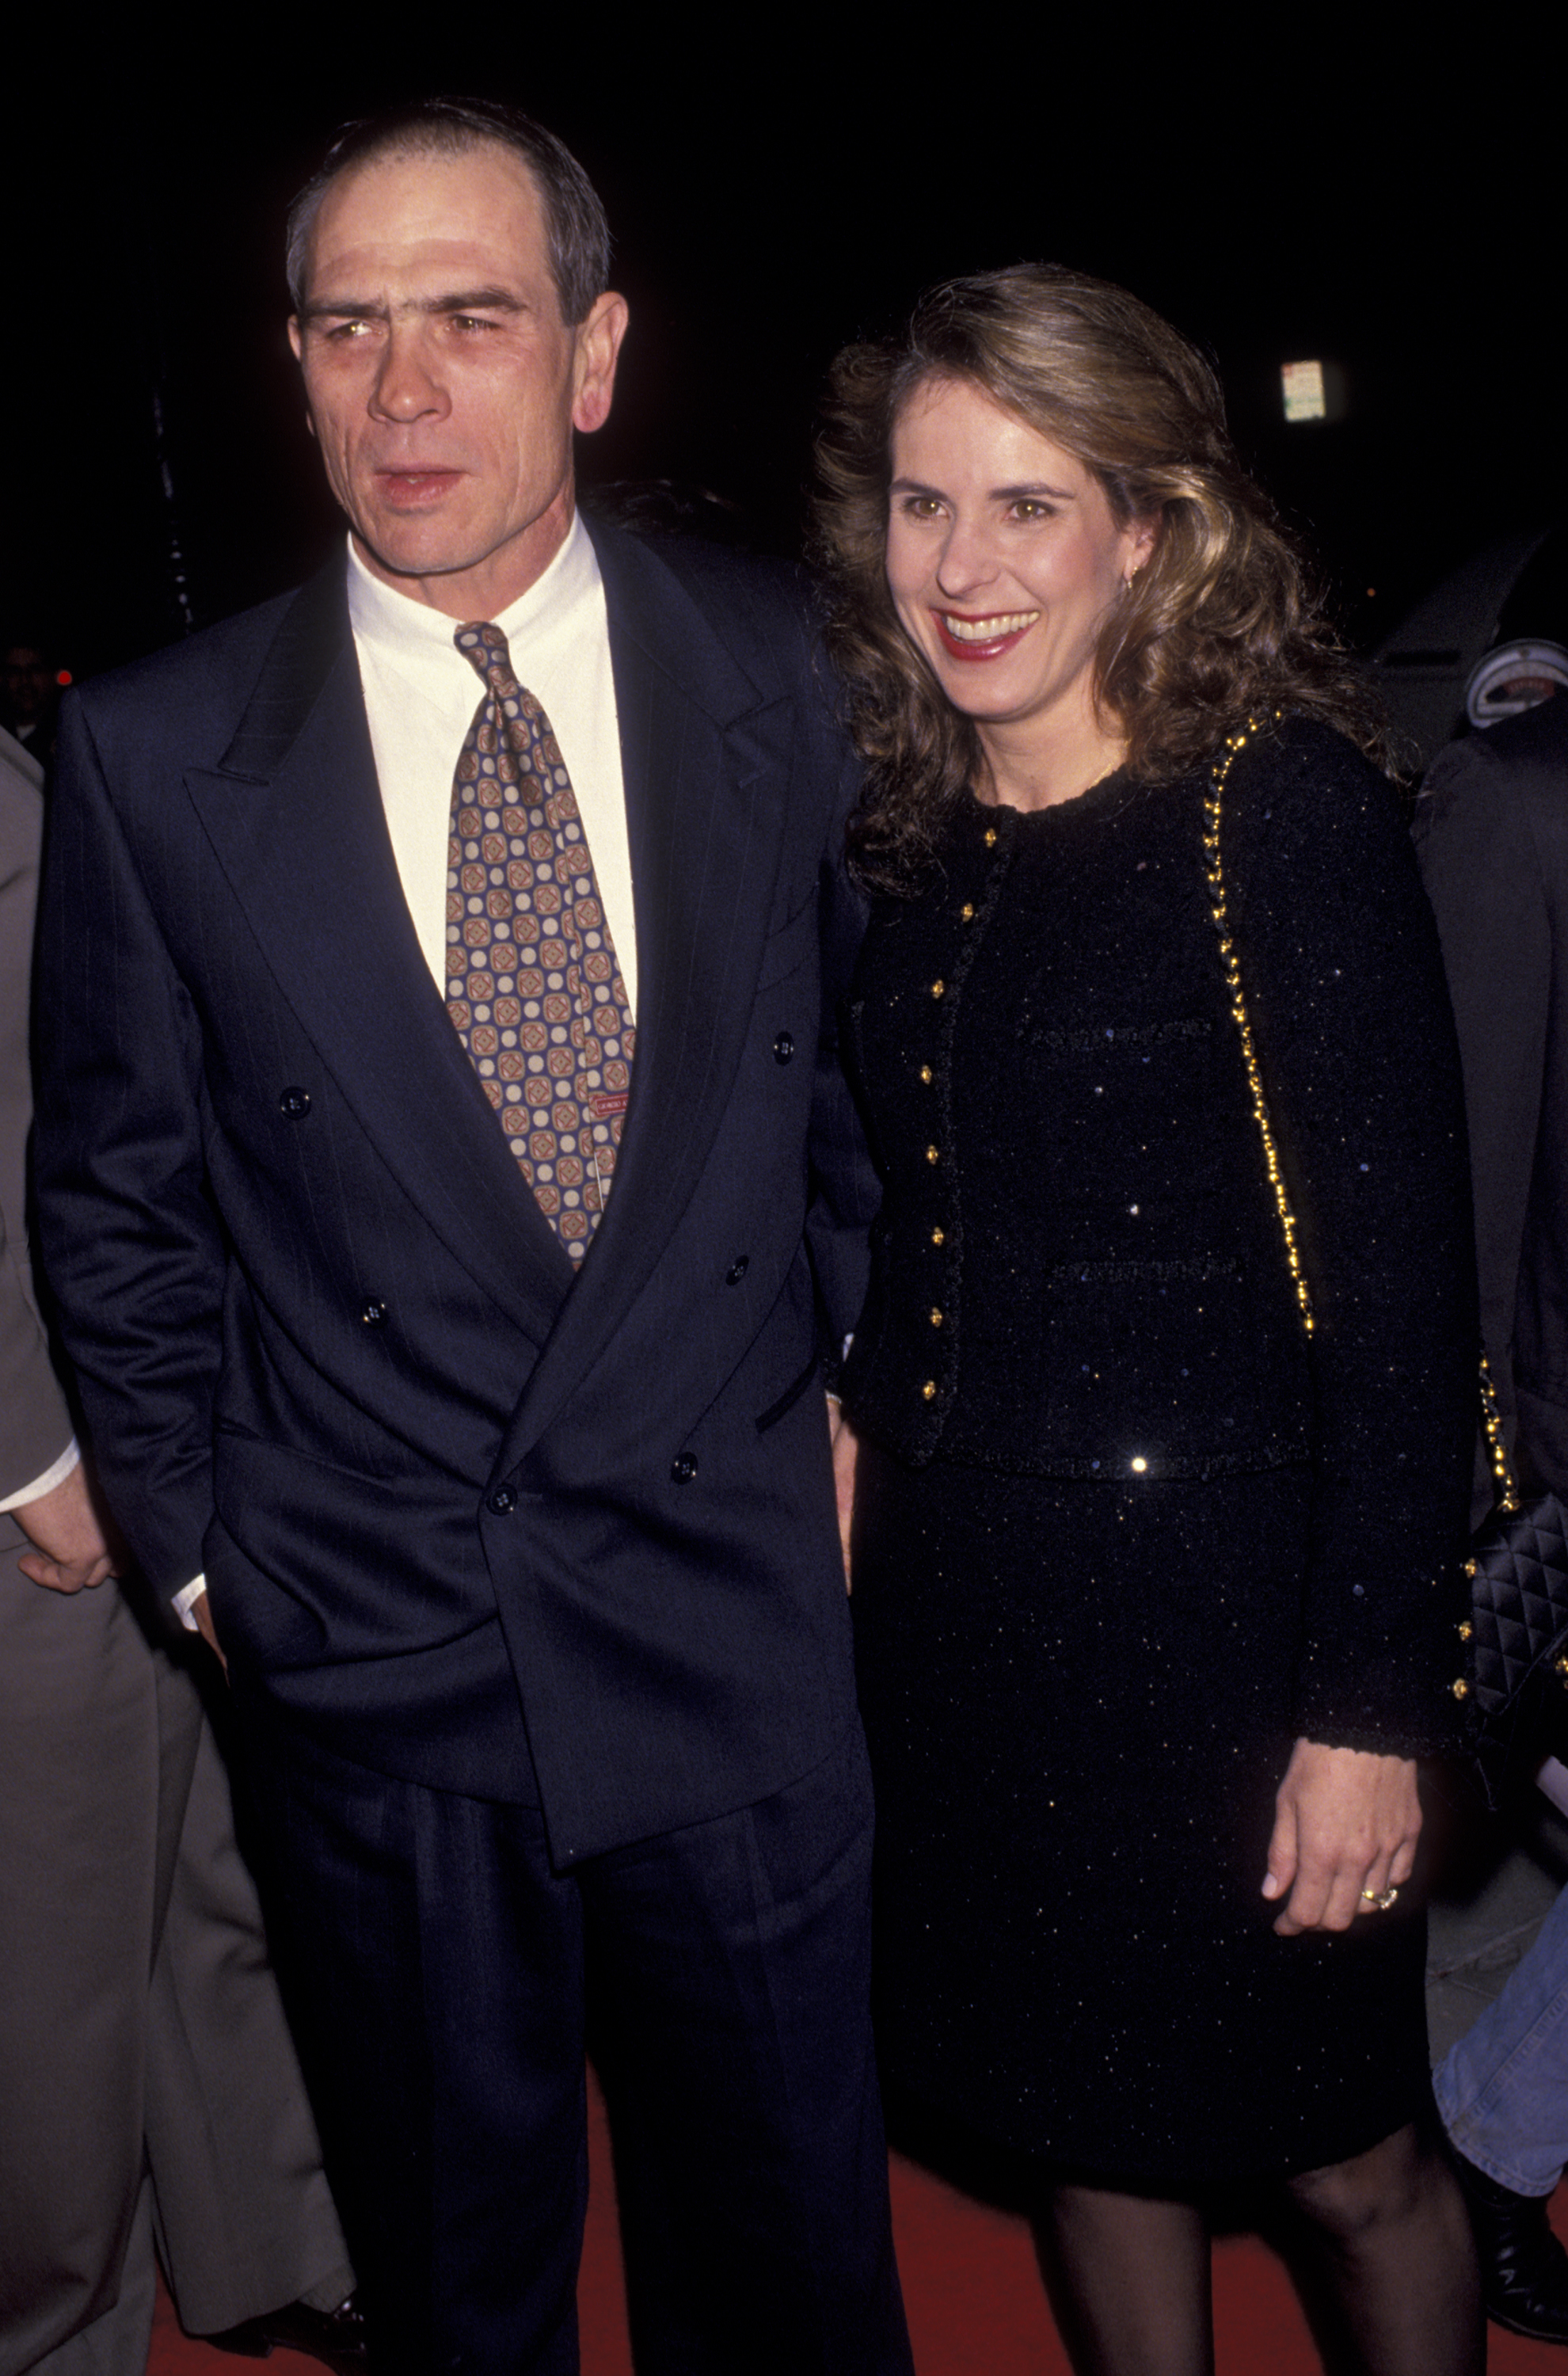 Tommy Lee Jones and his wife Kimberlea Jones at the screening of "Heaven and Earth" on December 16, 1993, in Beverly Hills, California | Source: Getty Images